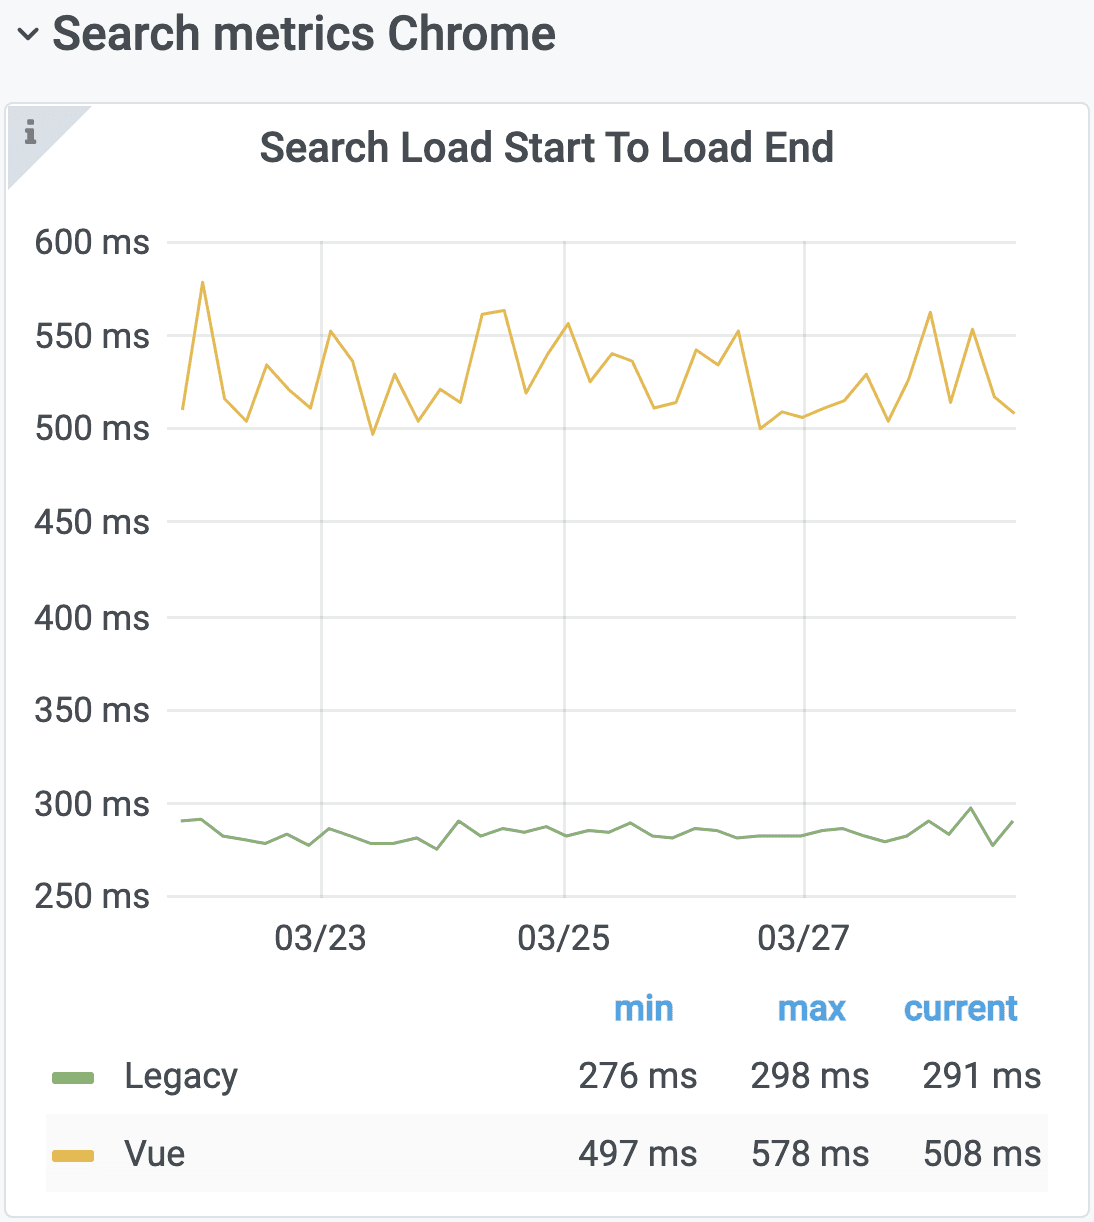 Graph of 'search load start to load end' metric